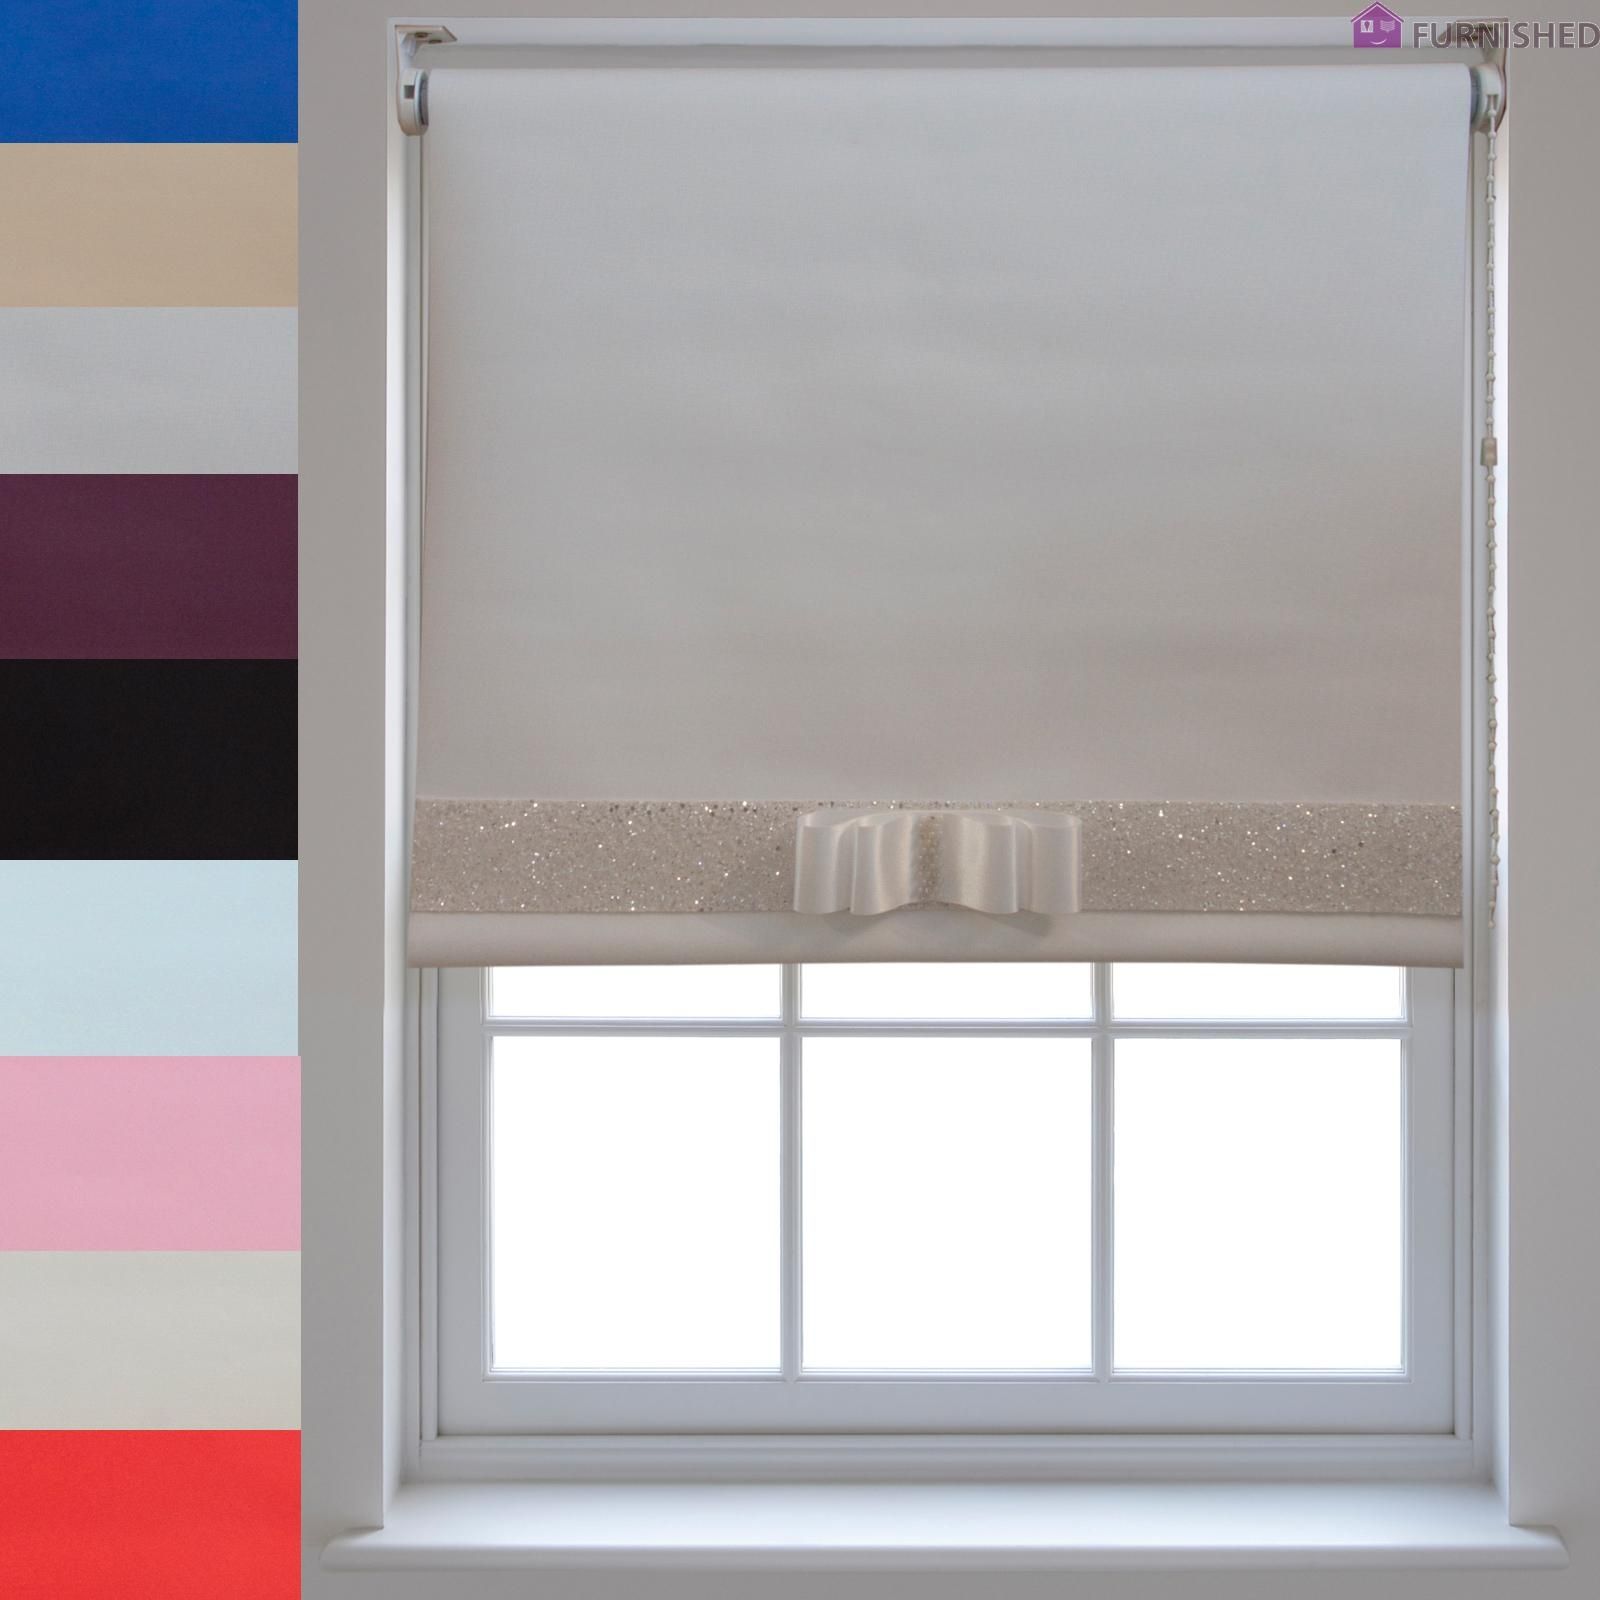 Blackout Roller Blinds Decorative Glitter Fabric Bow Quality Pertaining To Blackout Thermal Blinds (View 2 of 15)